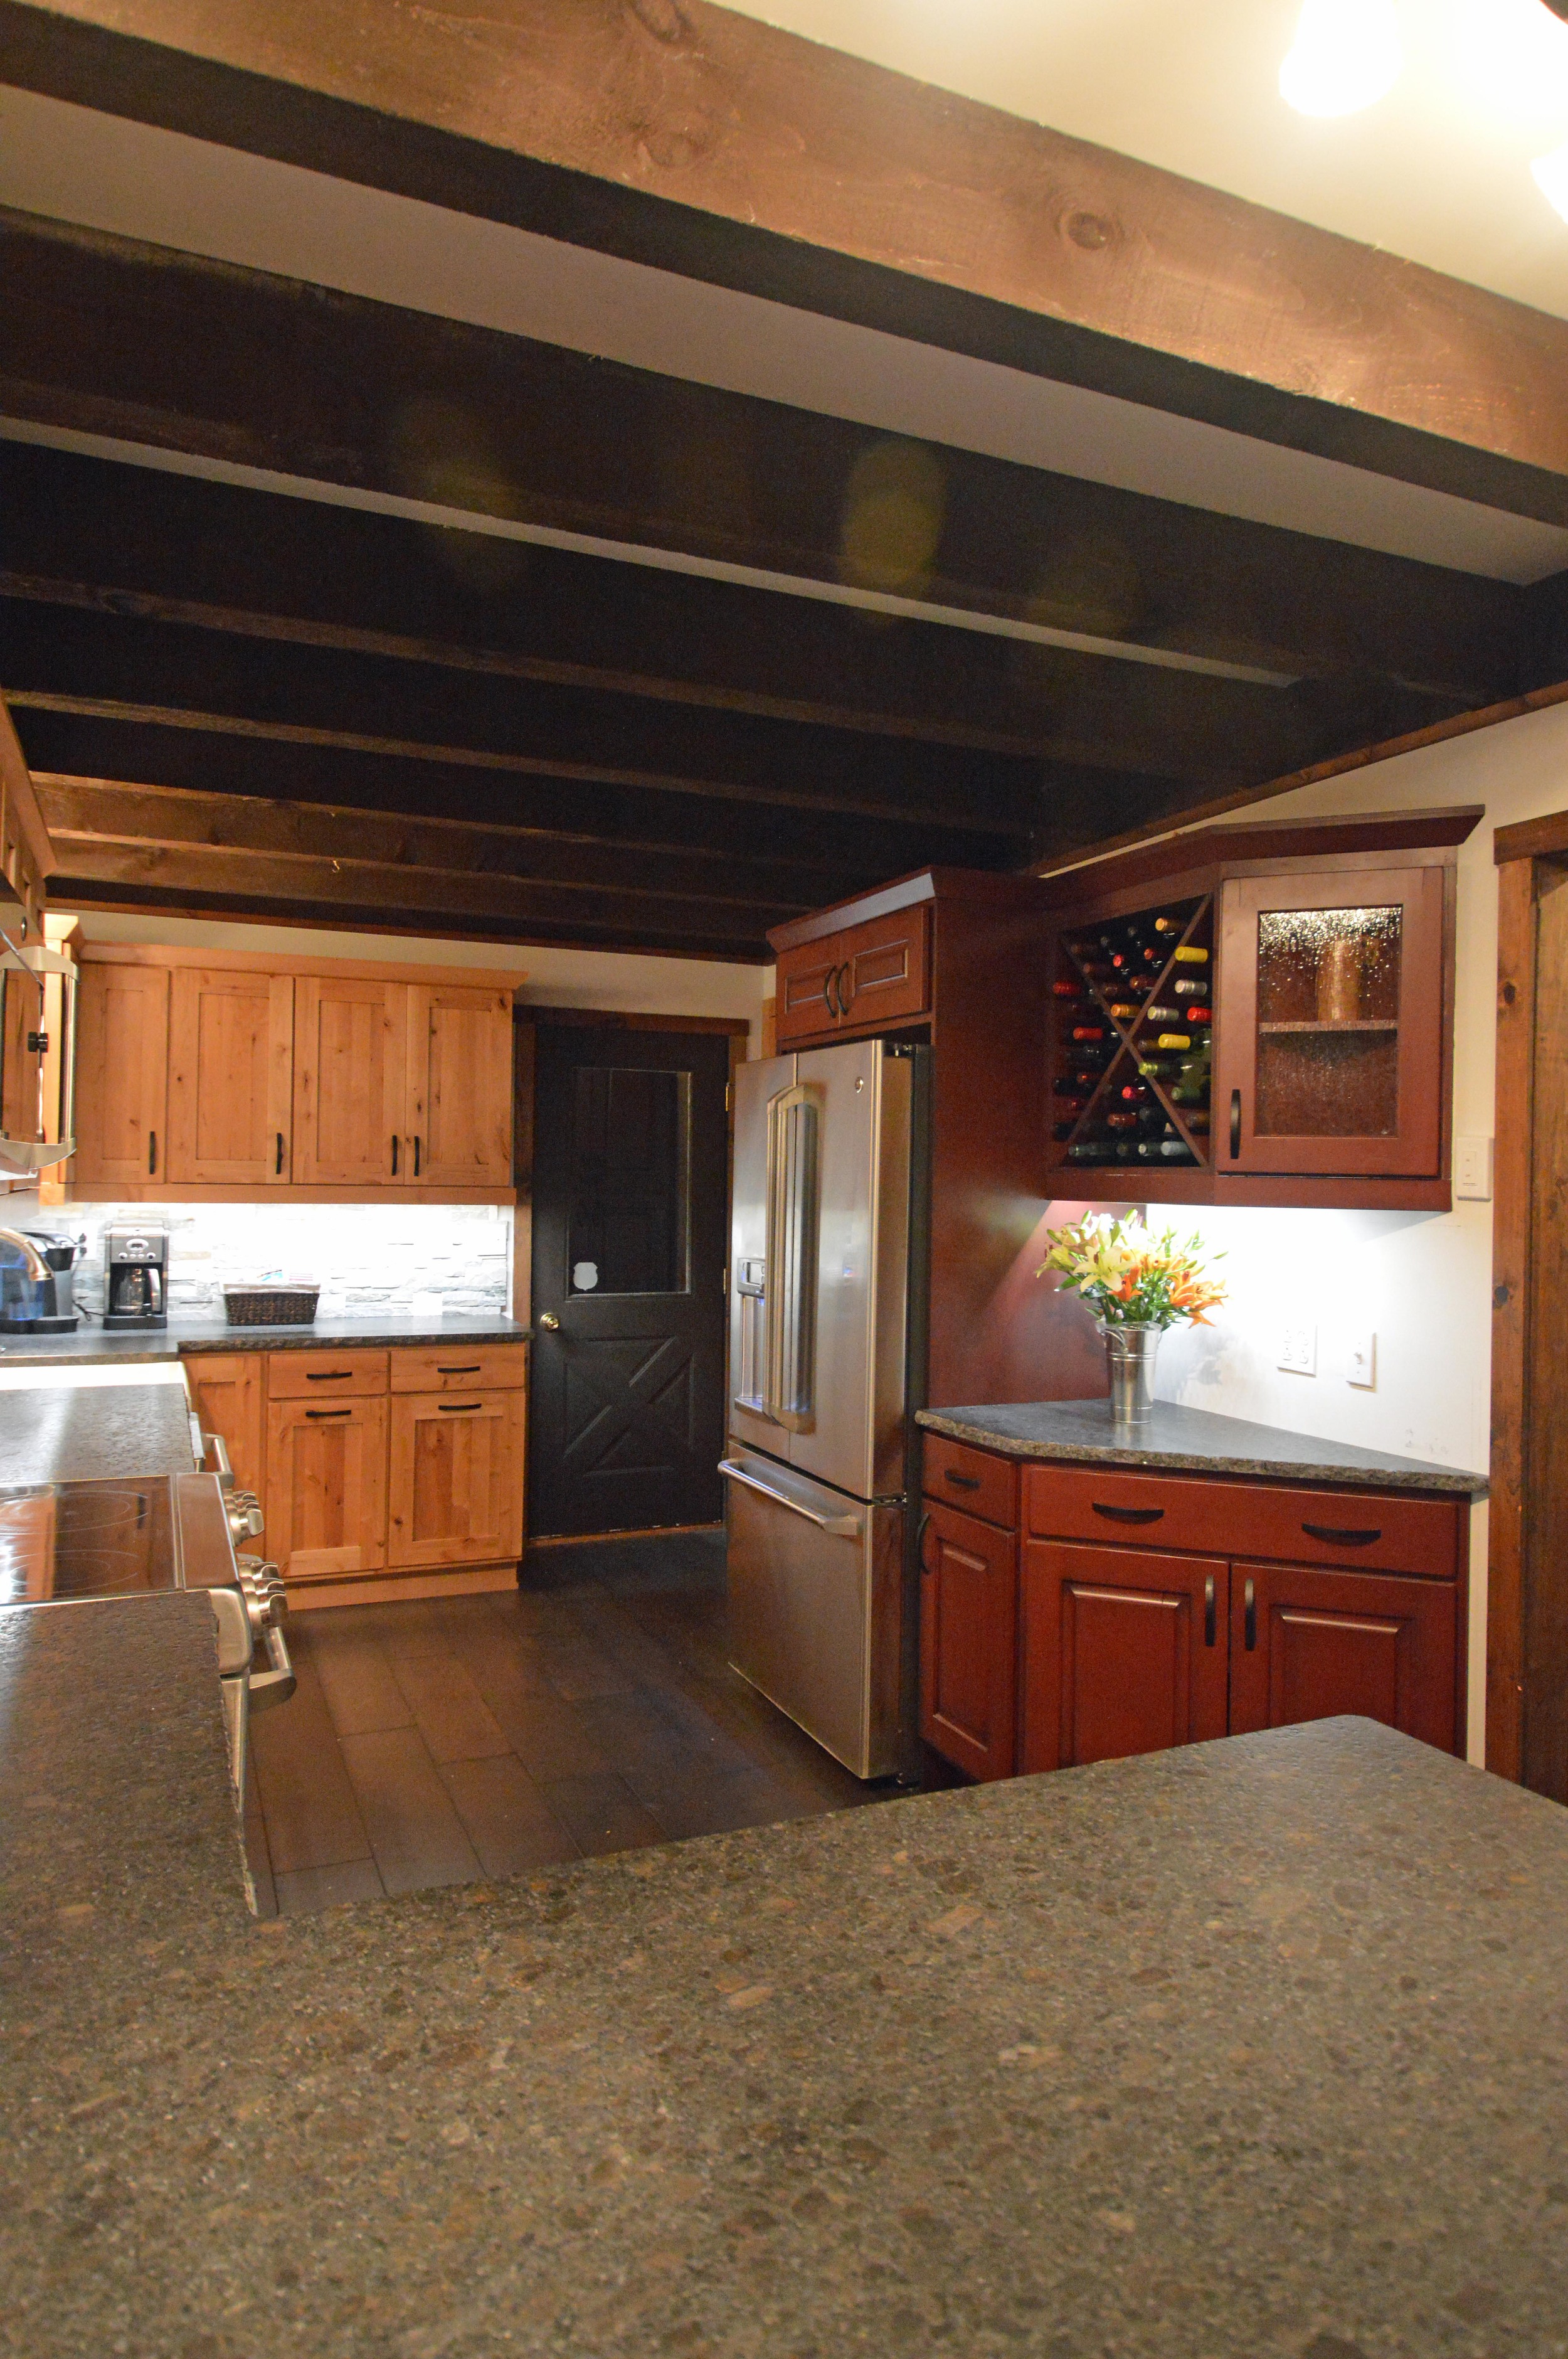 Rustic kitchen remodel in Bolton Landing, NY